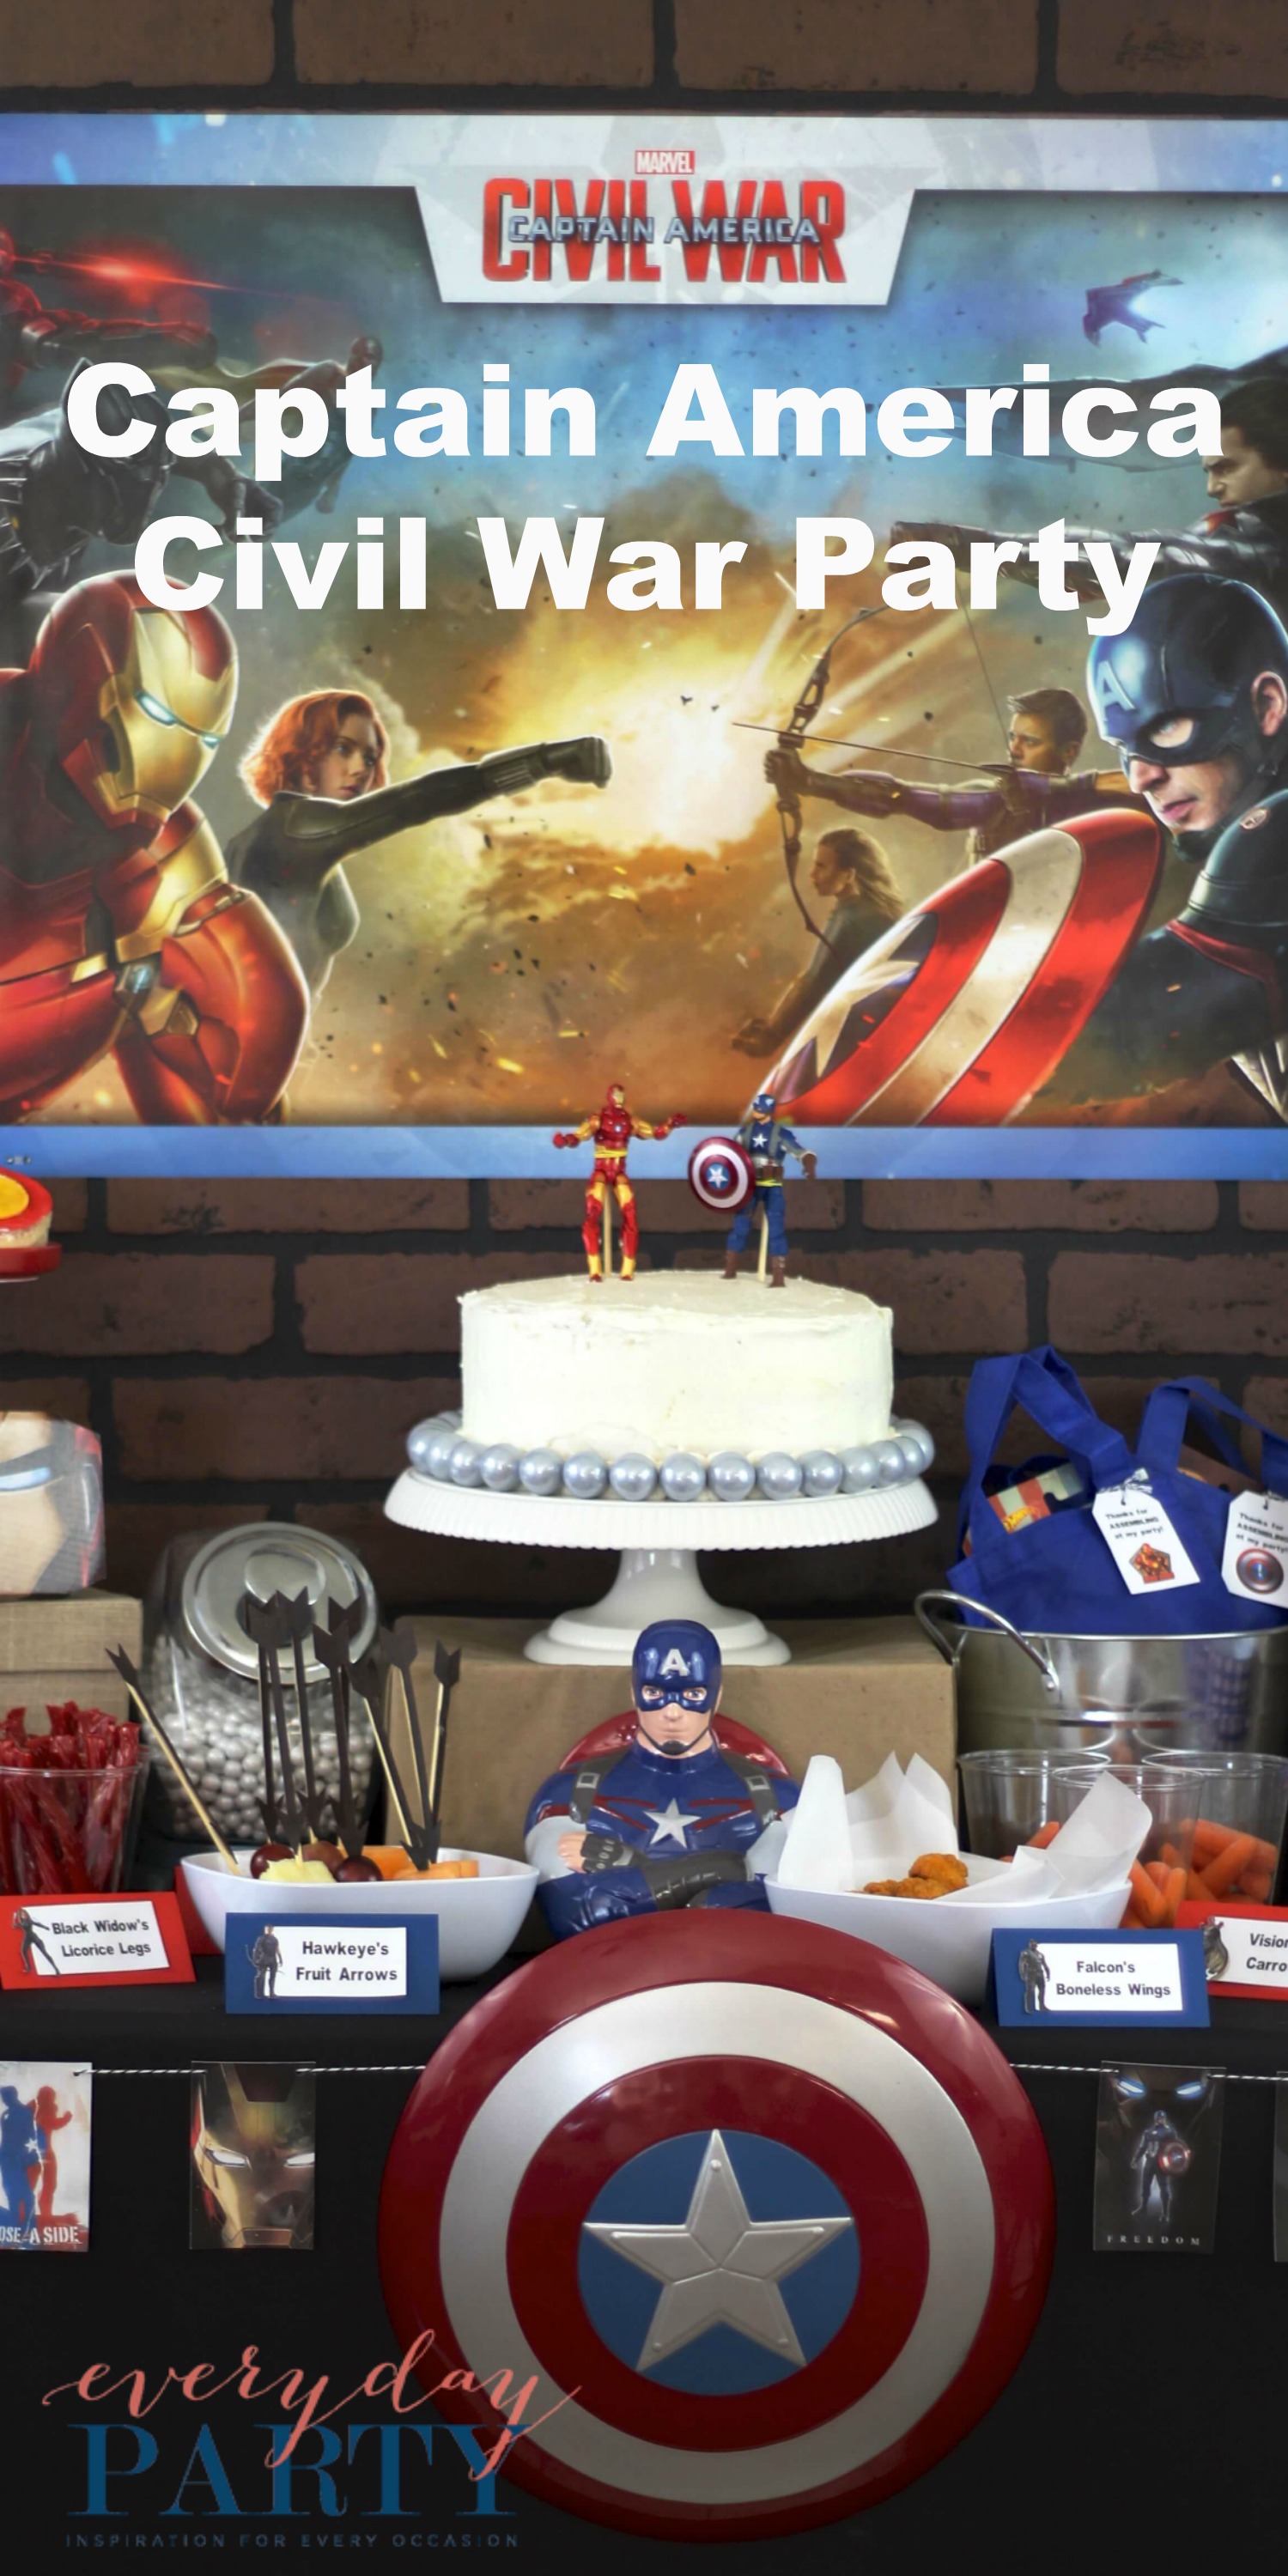 Everyday Party Magazine Captain America Civil War Party 